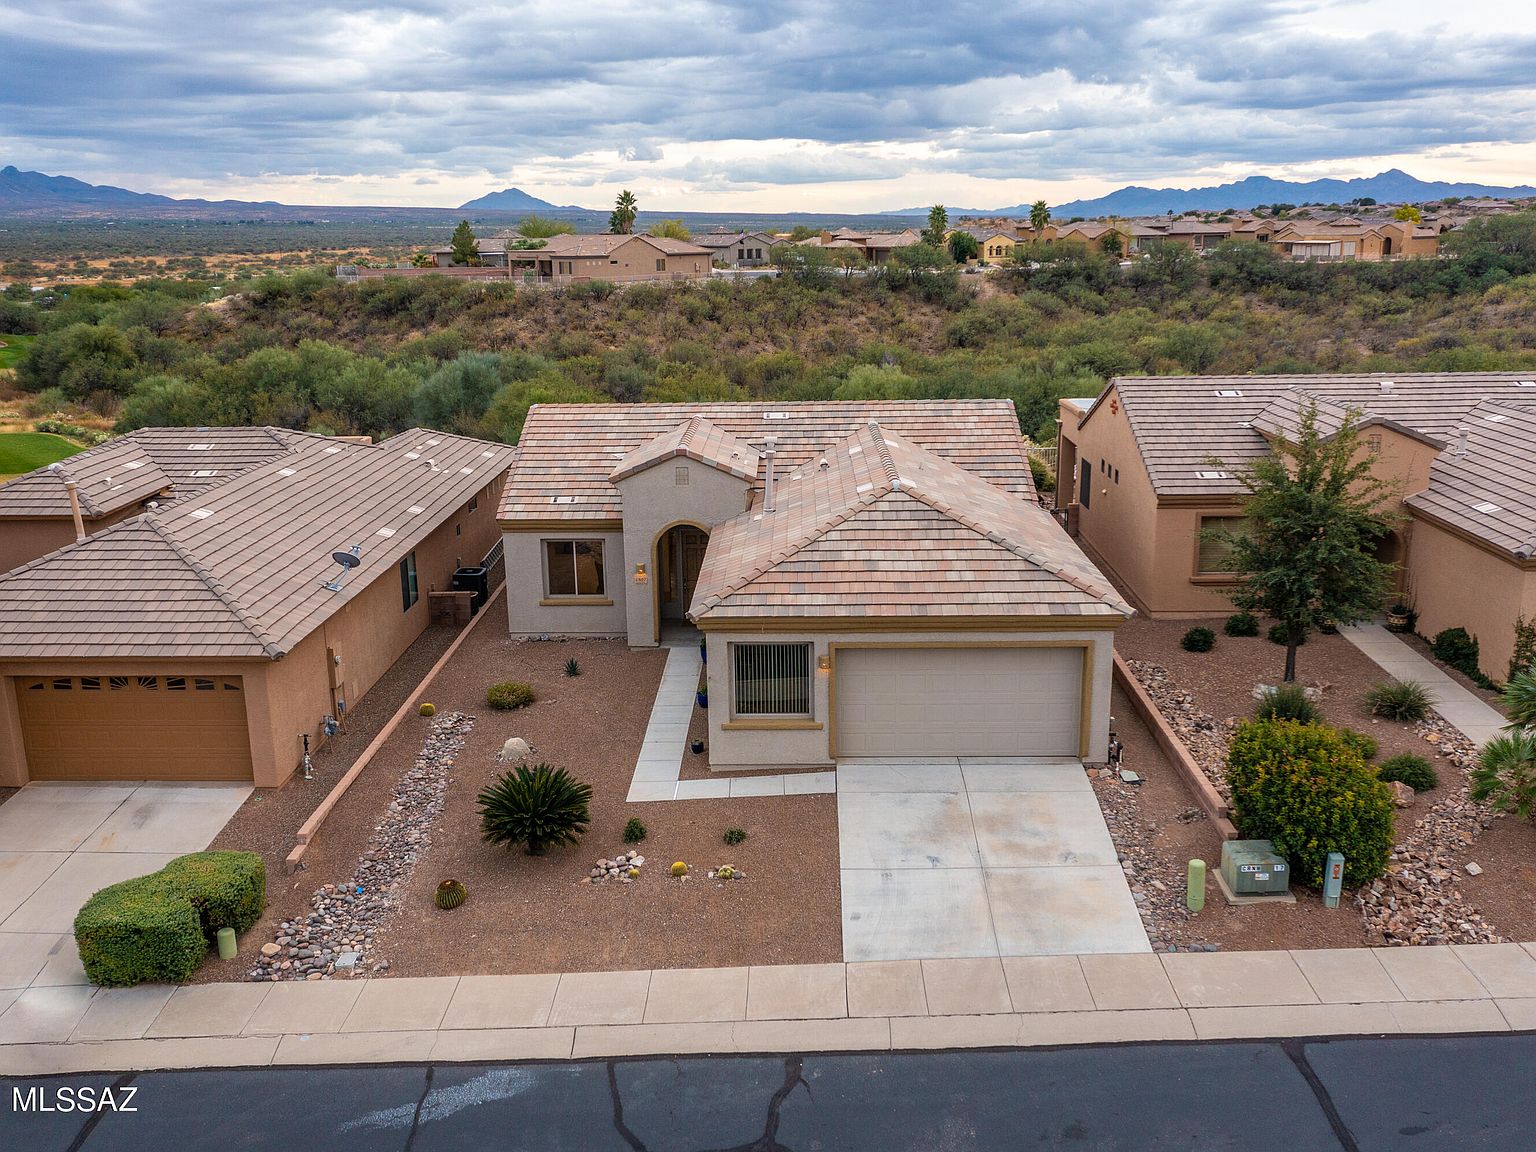 2339 S Orchard View Dr, Green Valley, AZ 85614 - MLS #22132569 - Zillow